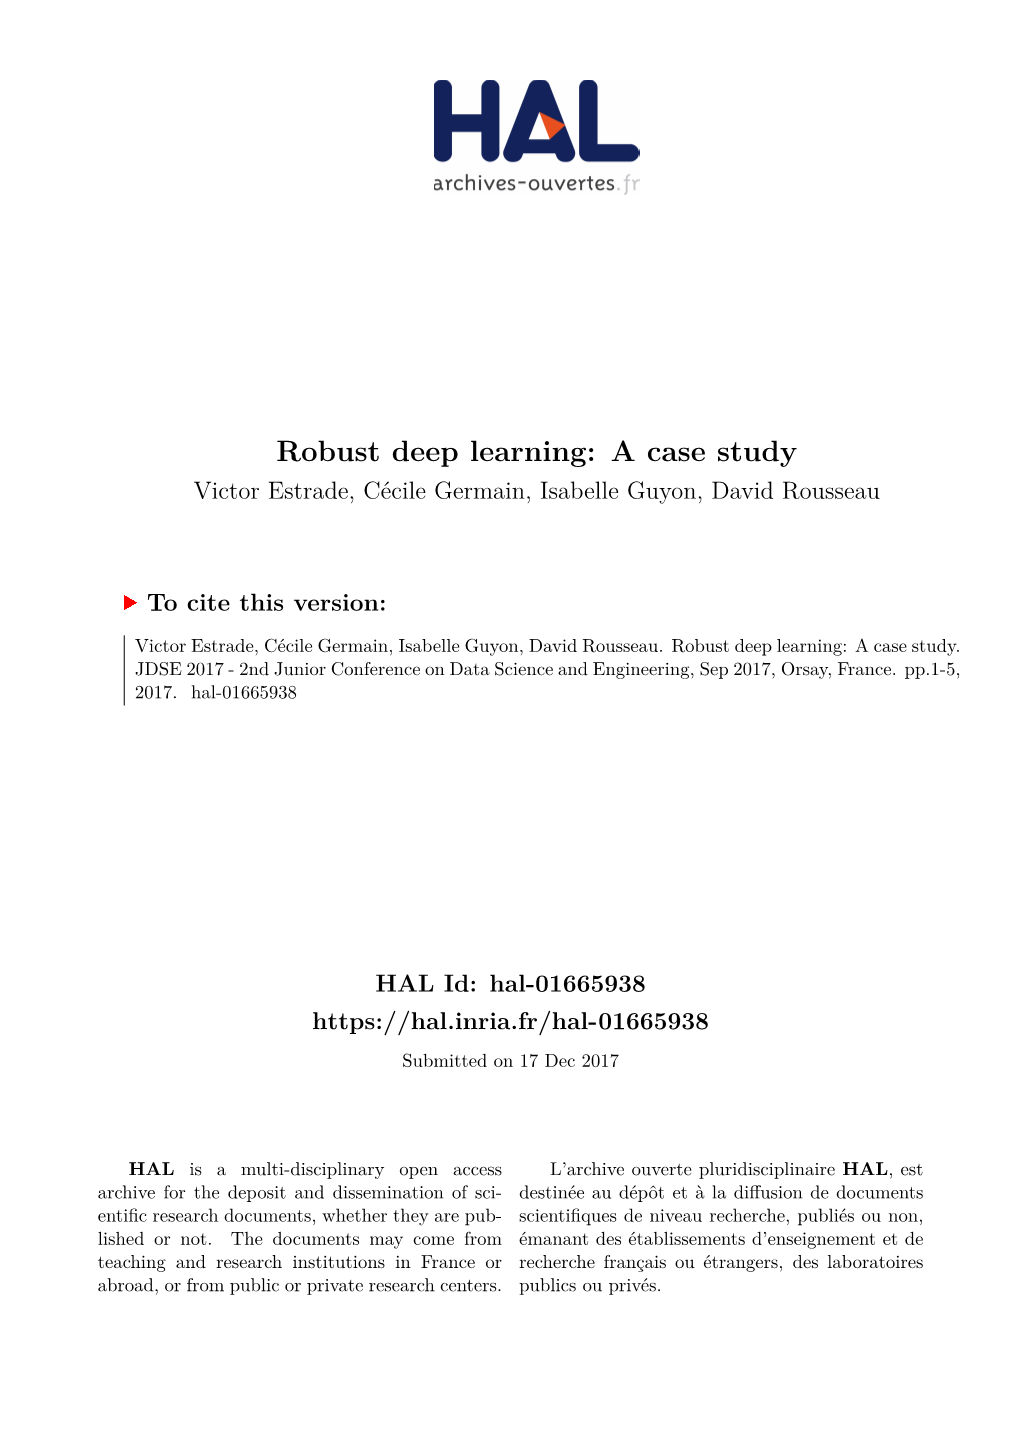 Robust Deep Learning: a Case Study Victor Estrade, Cécile Germain, Isabelle Guyon, David Rousseau